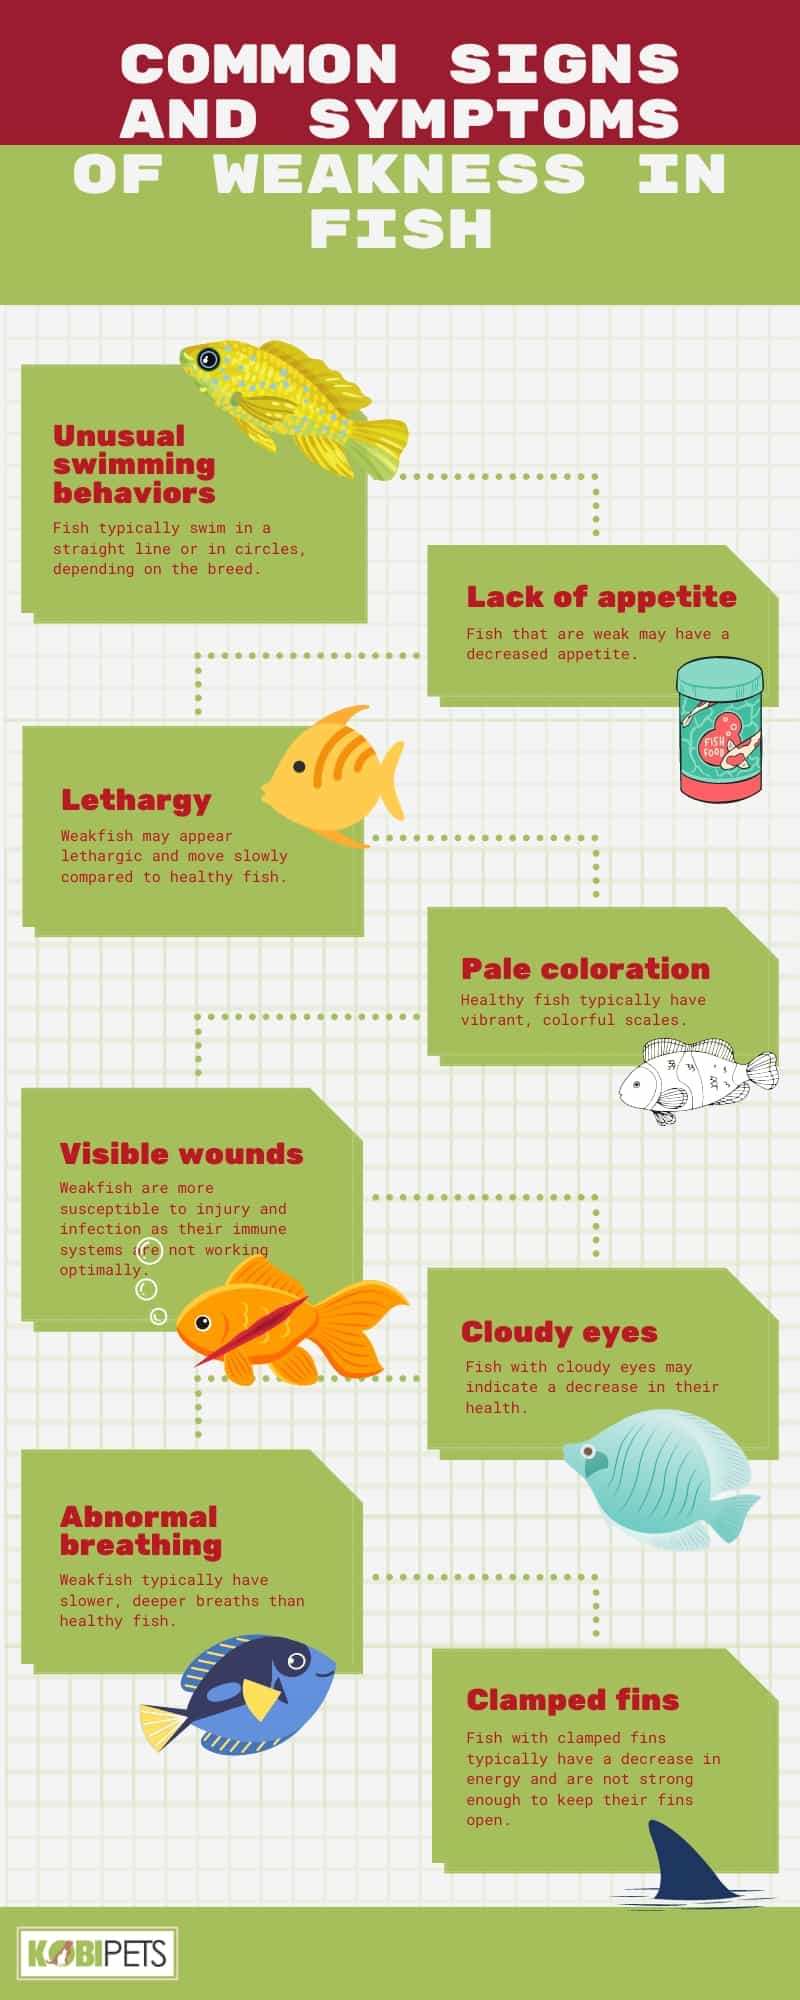 Common Signs and Symptoms of Weakness in Fish